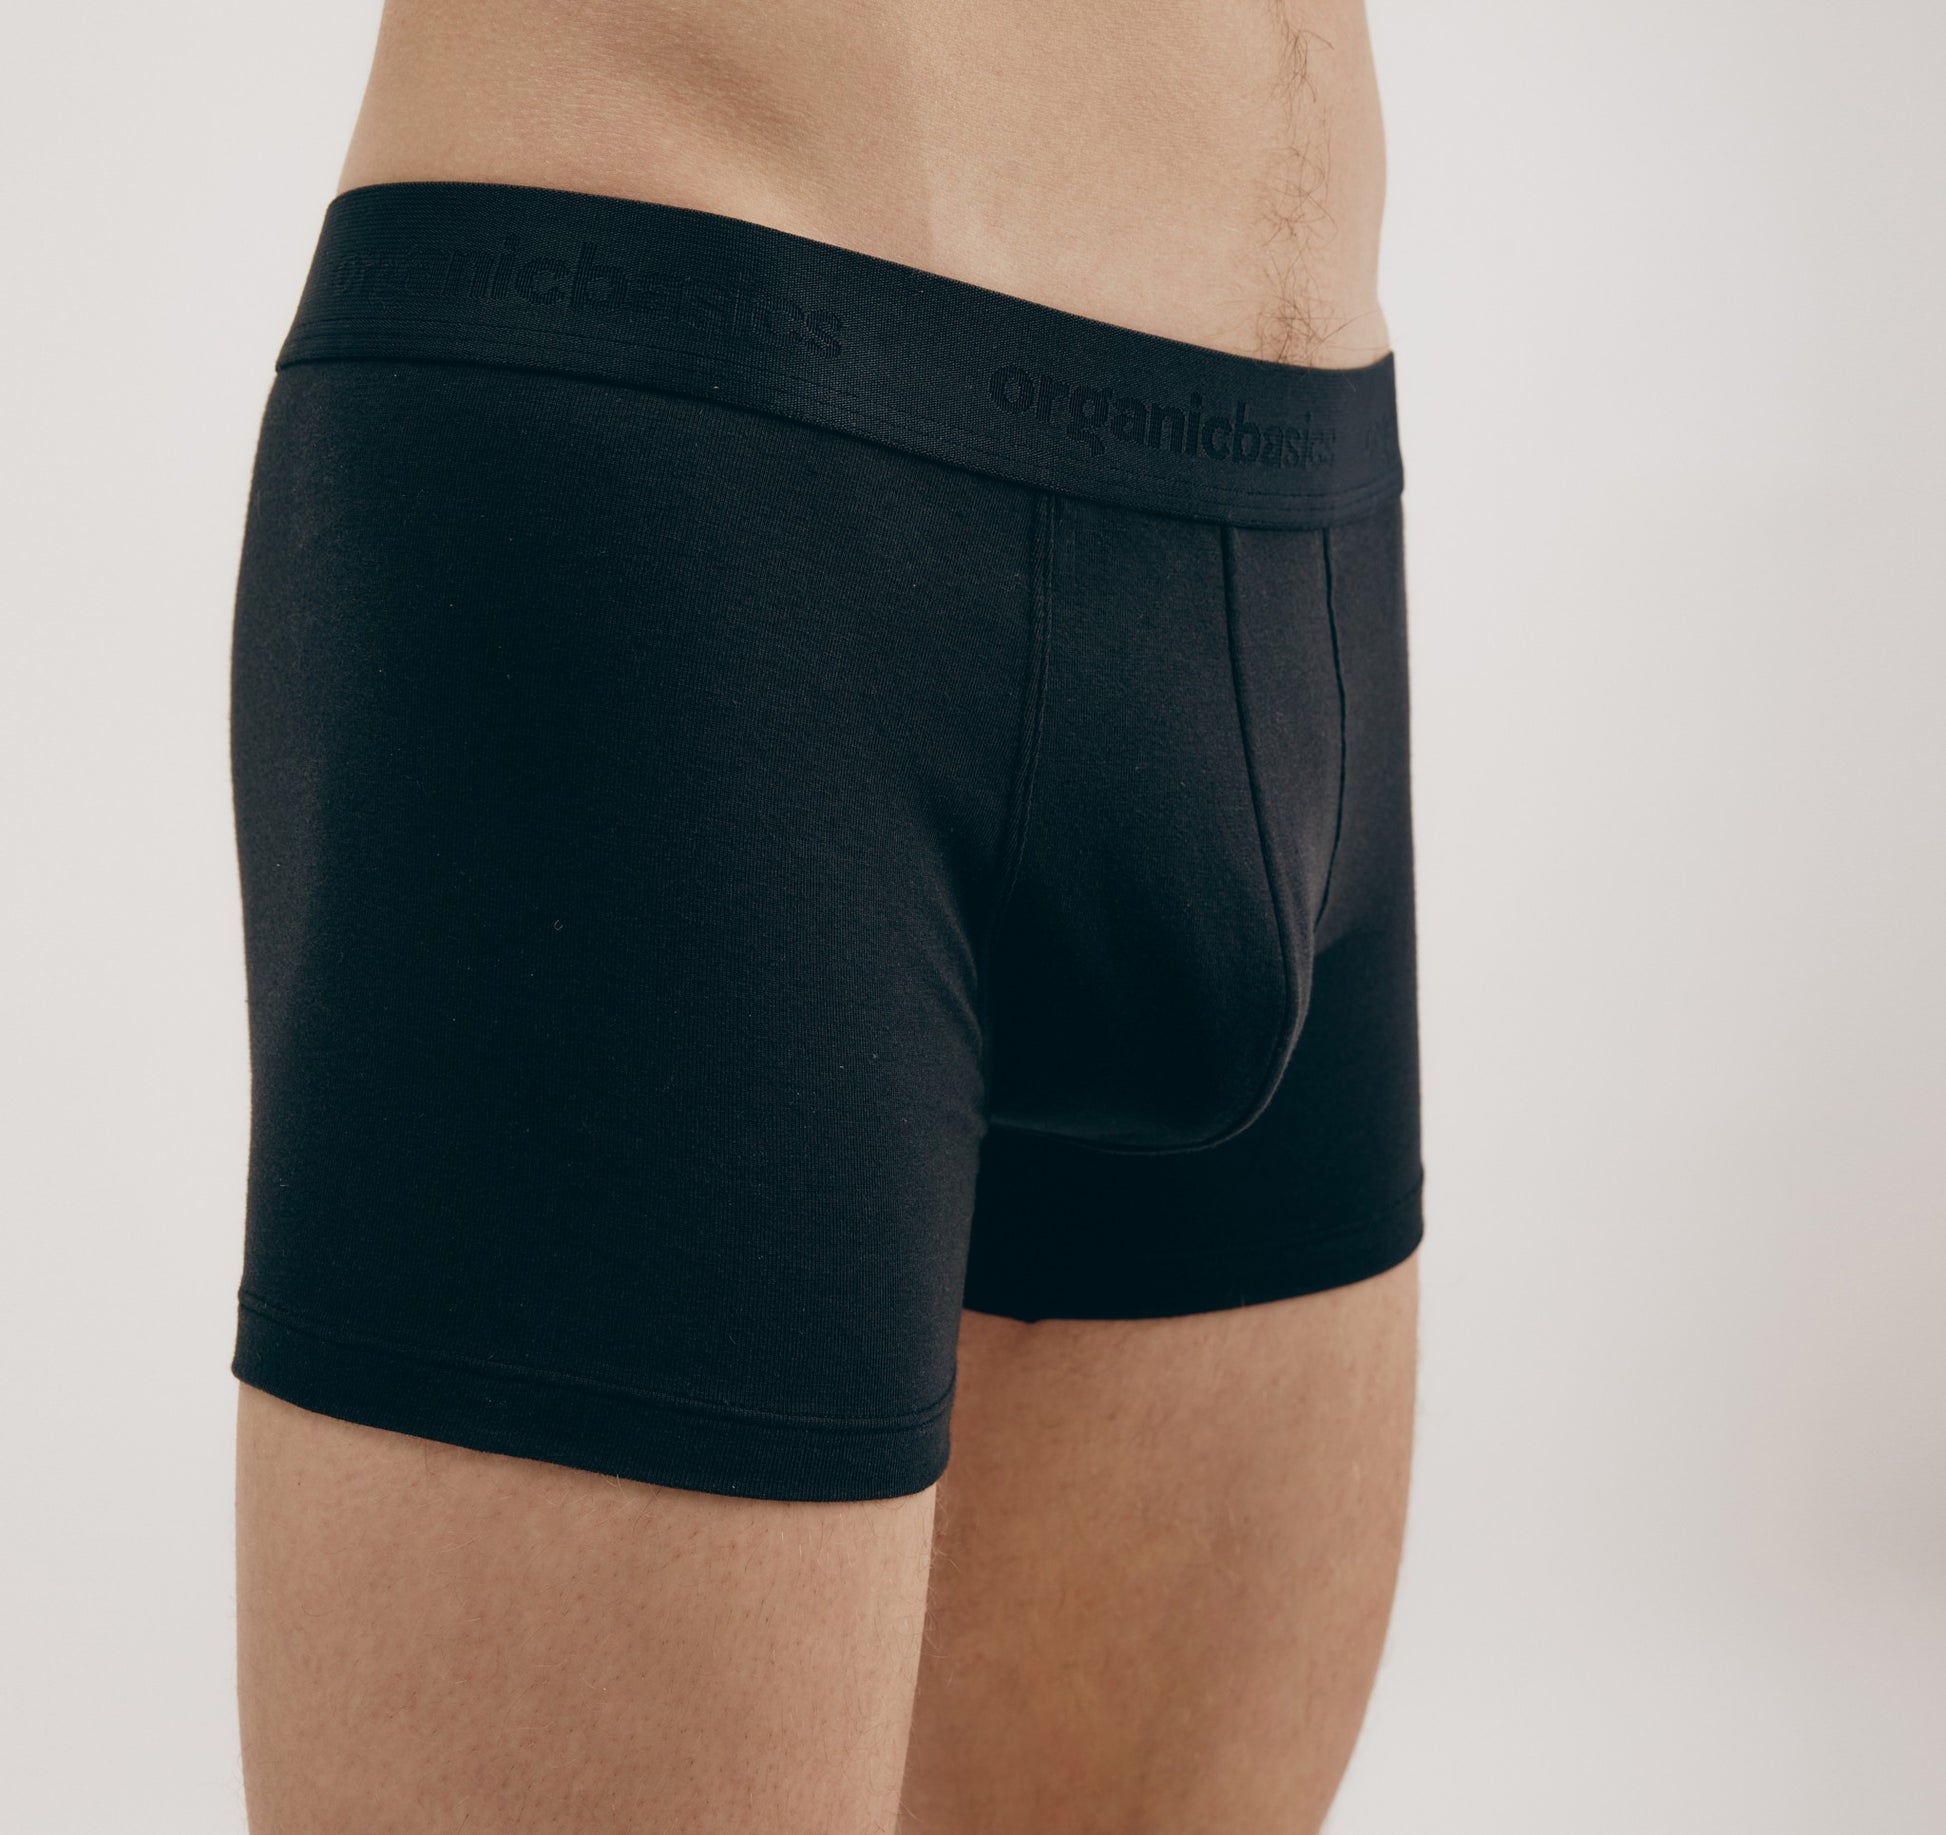 Buy Core Boxers 3-Pack, Fast Delivery